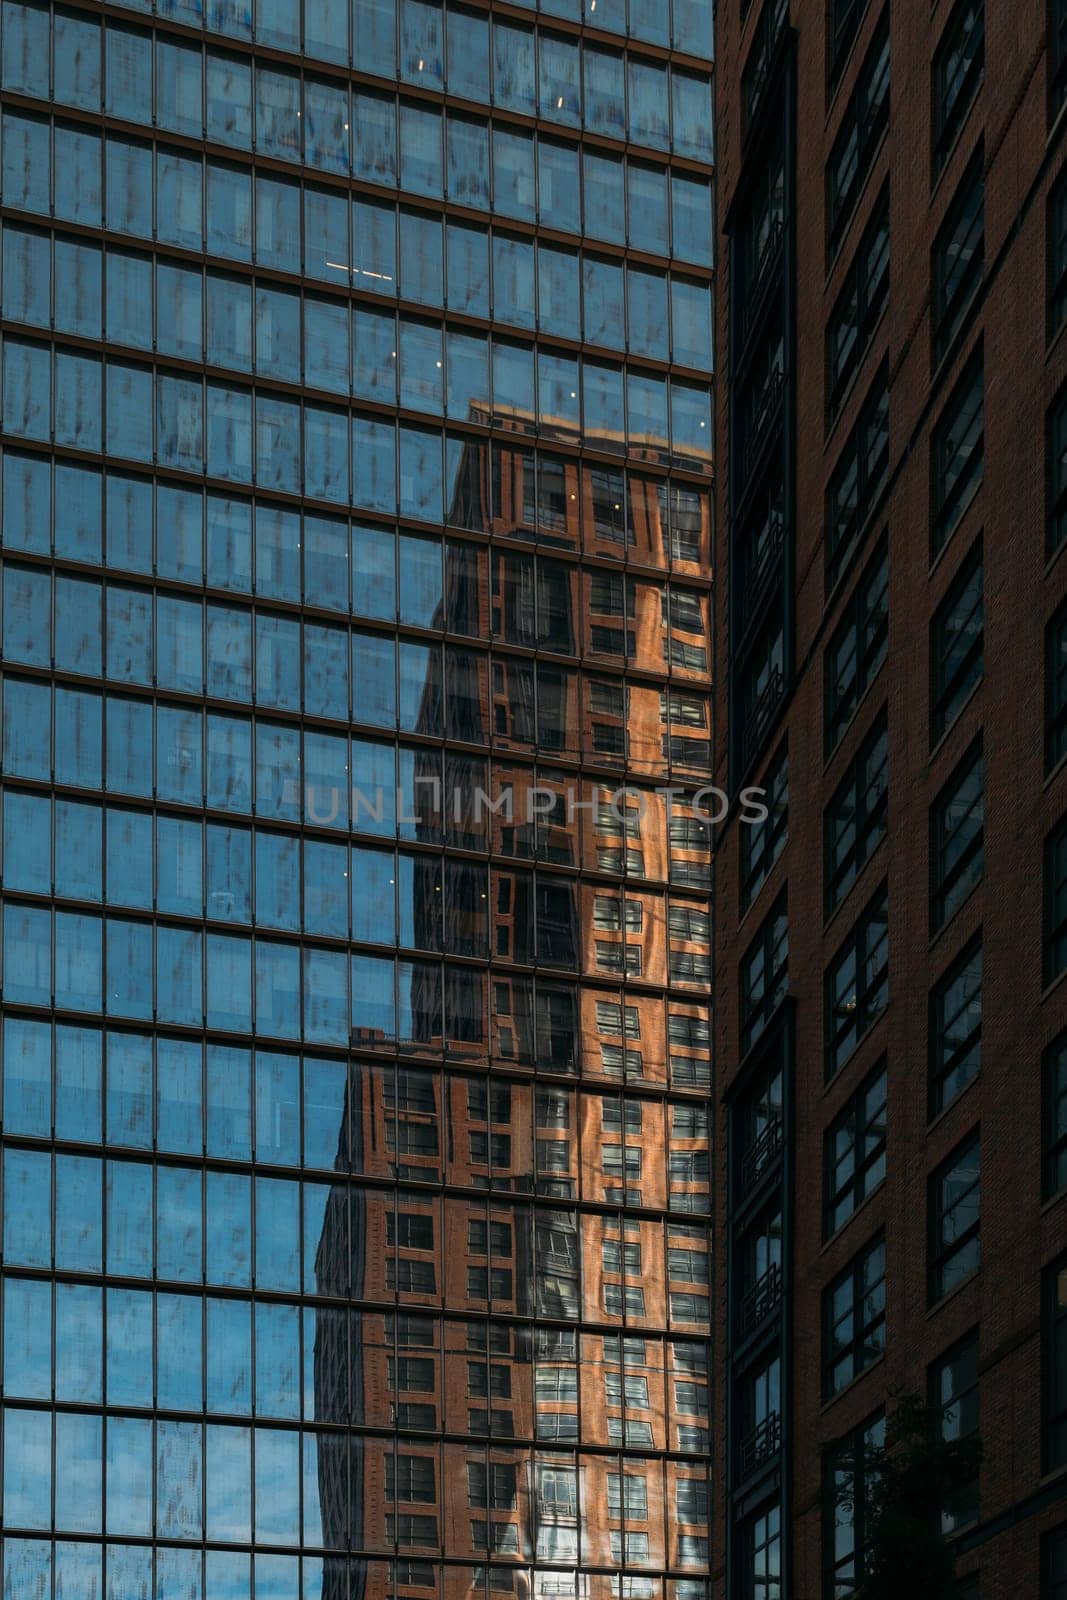 Reflection of a Traditional Building in Modern Glass Facade in NYC by apavlin